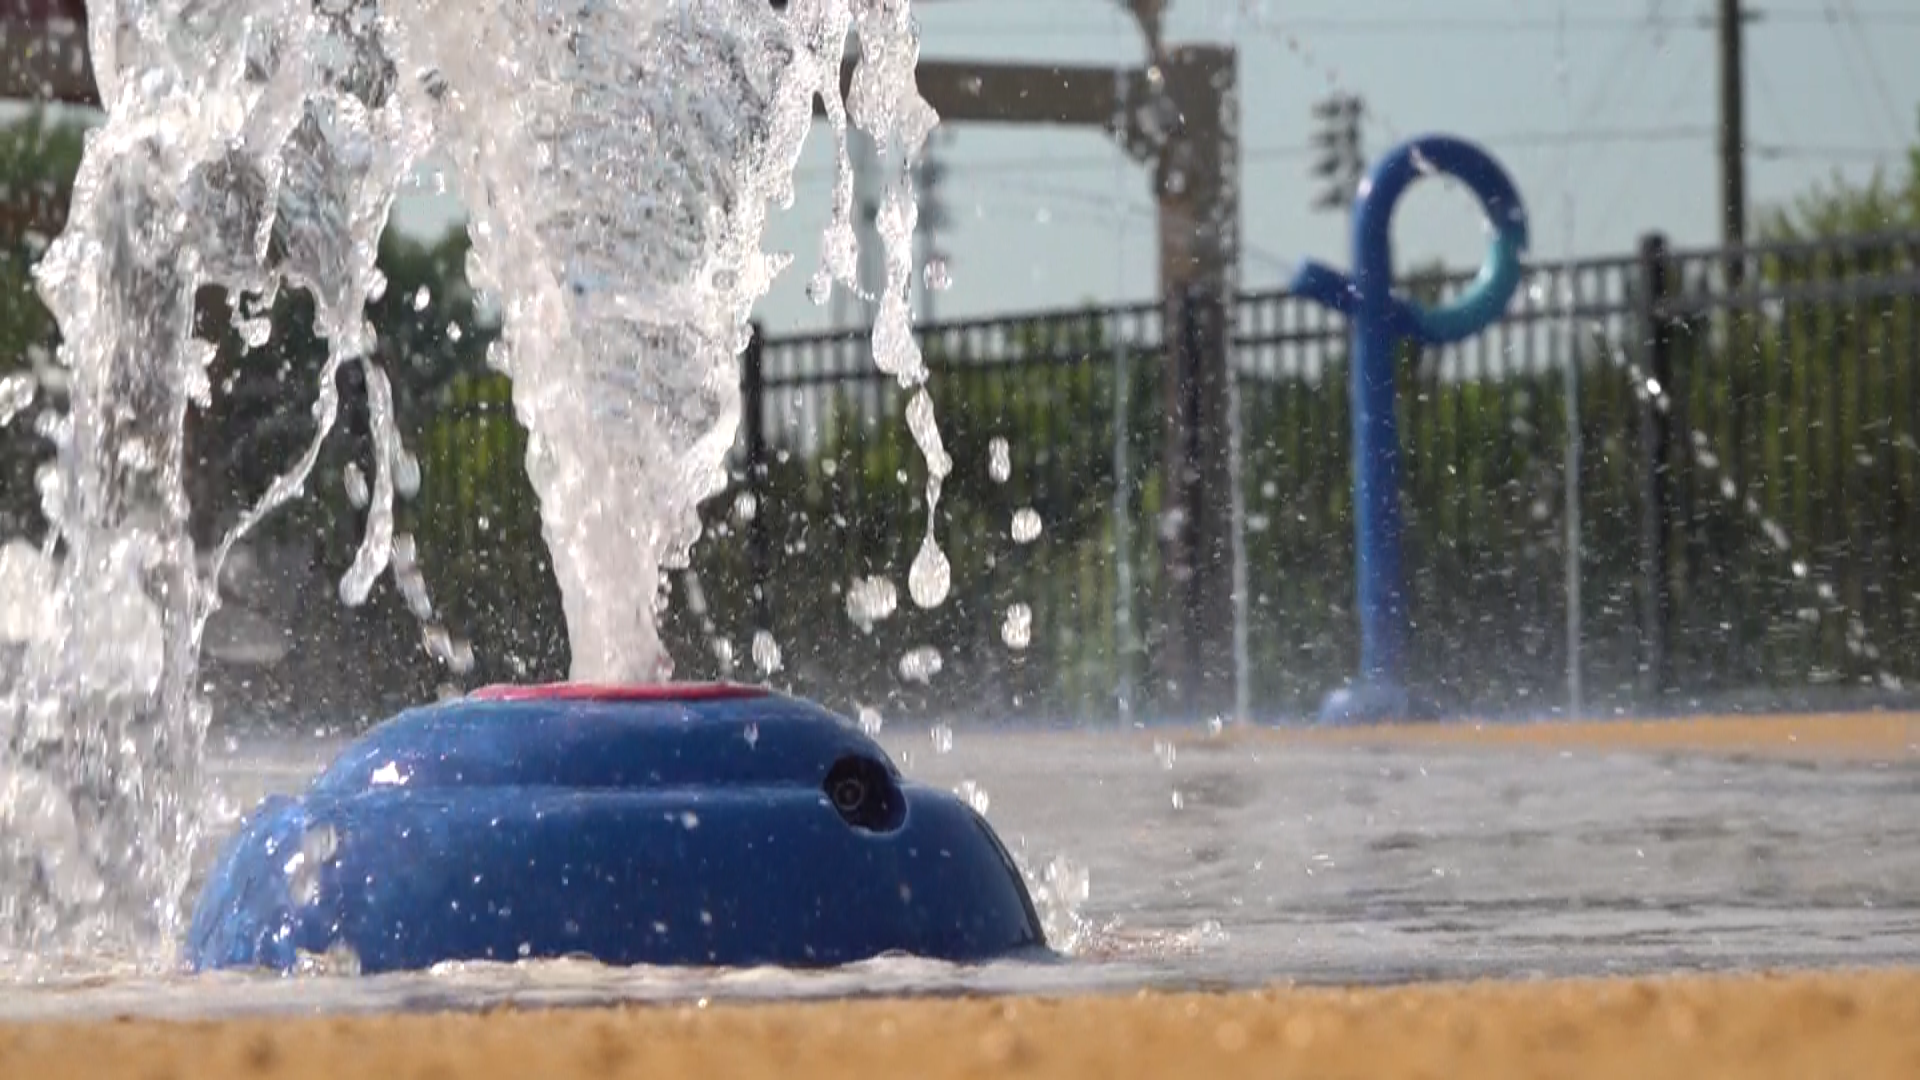 It’s opening weekend for the splash pad at Old Atlanta Park, and workers are ready for the crowds.